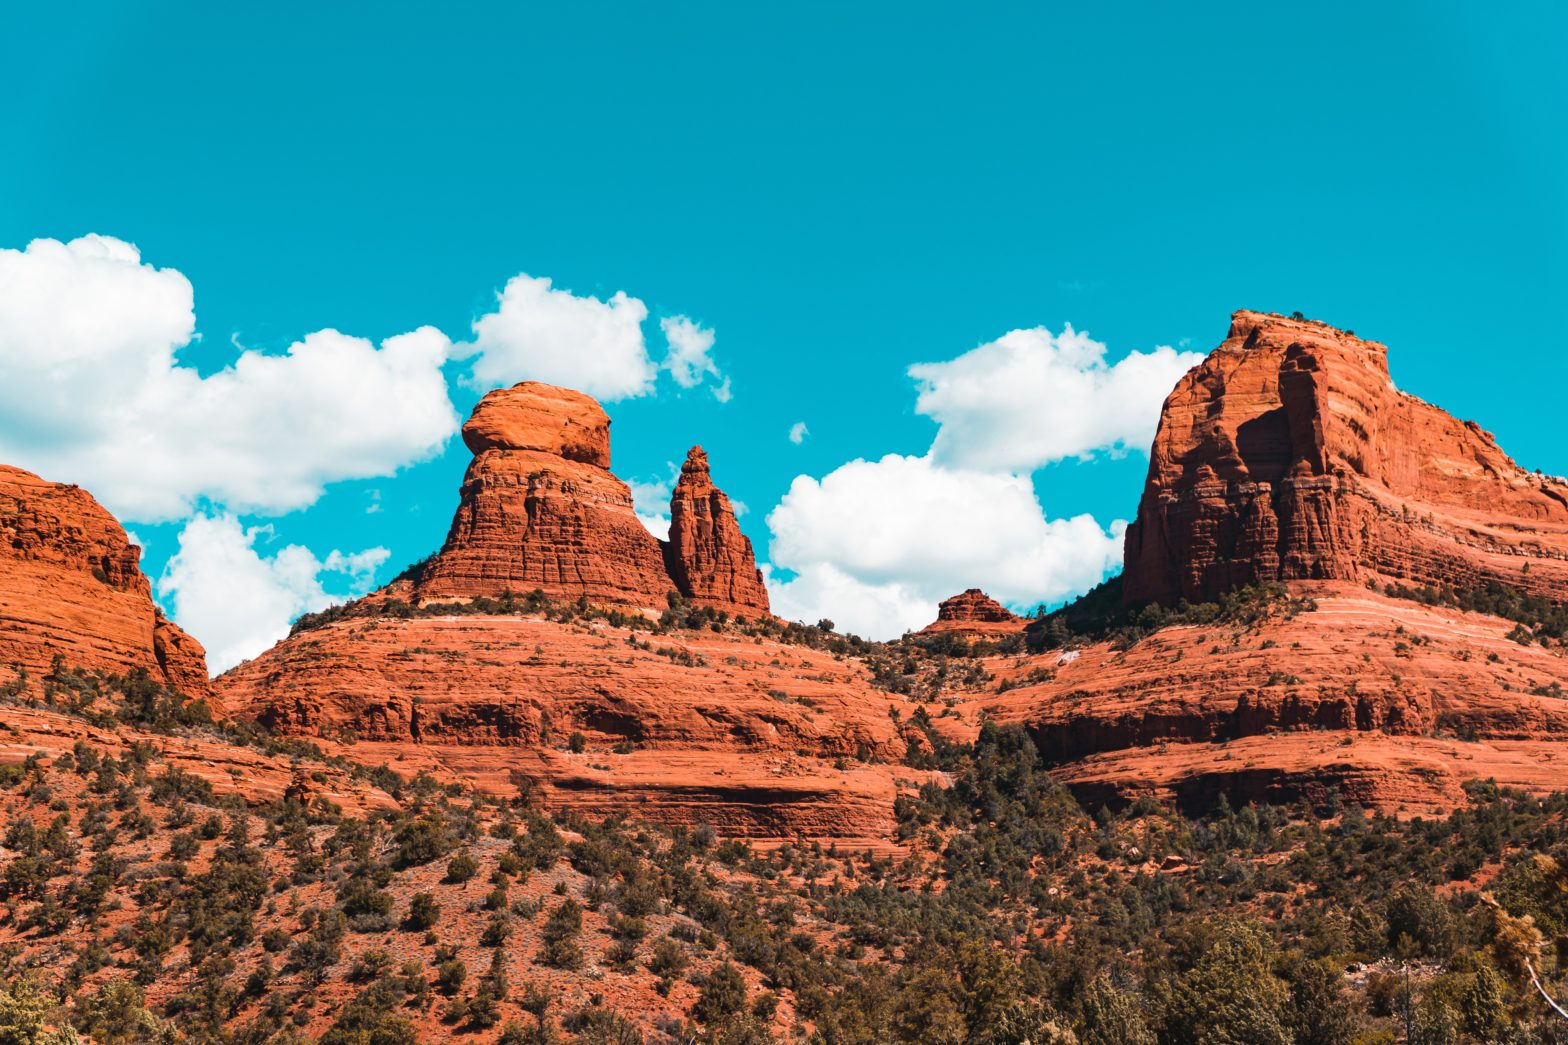 One Day in Sedona: Things To Do